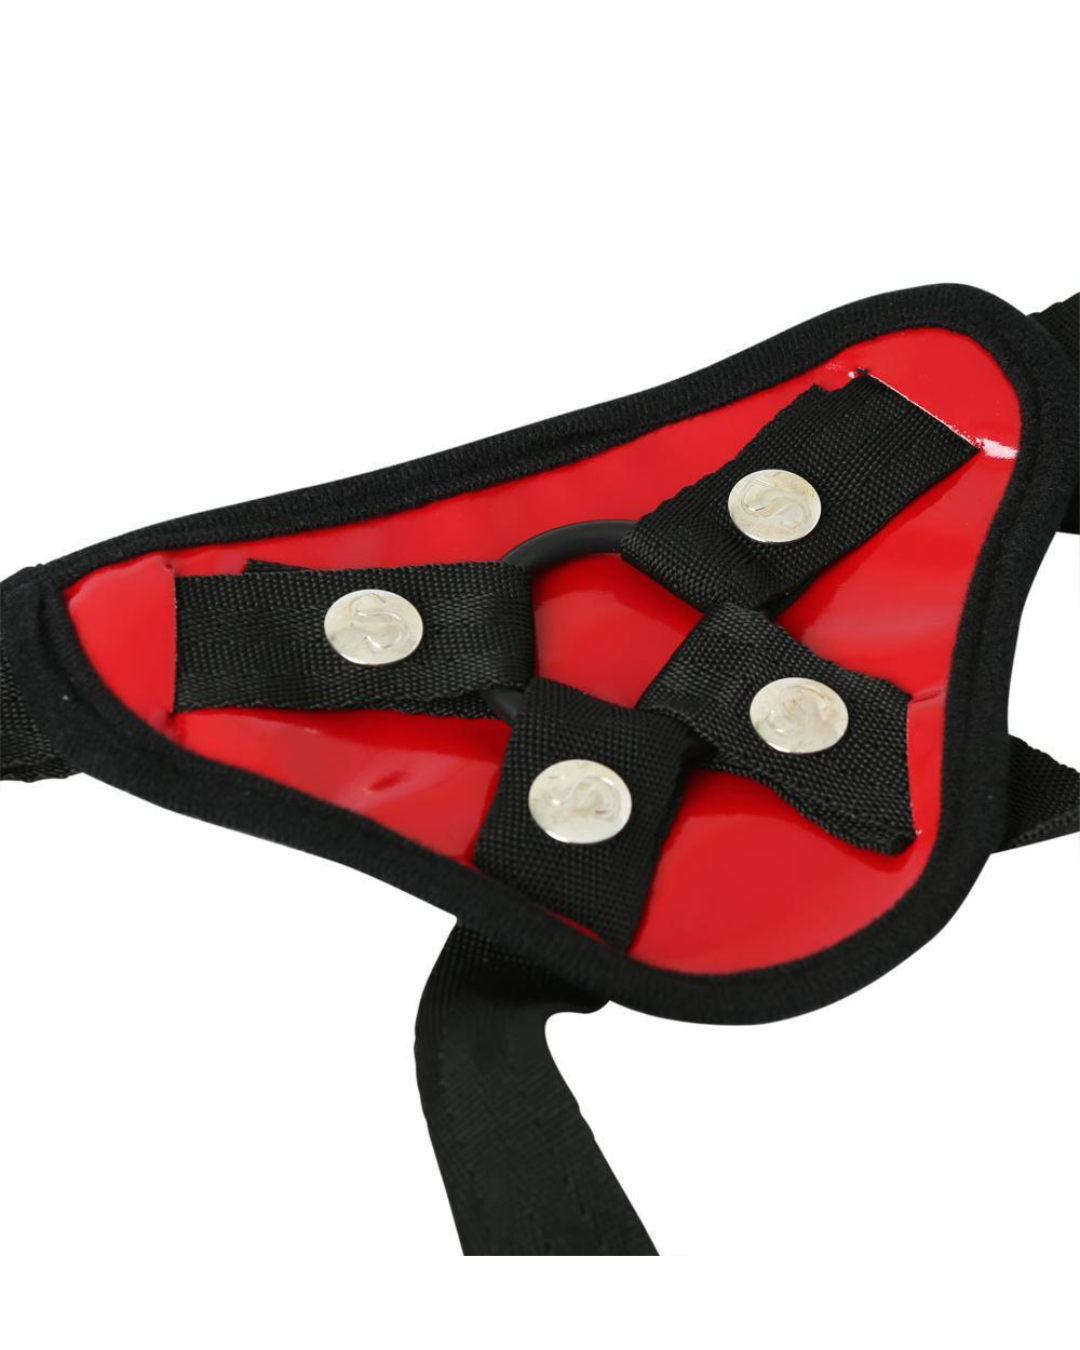 Sportsheets Entry Level Harness  - Red